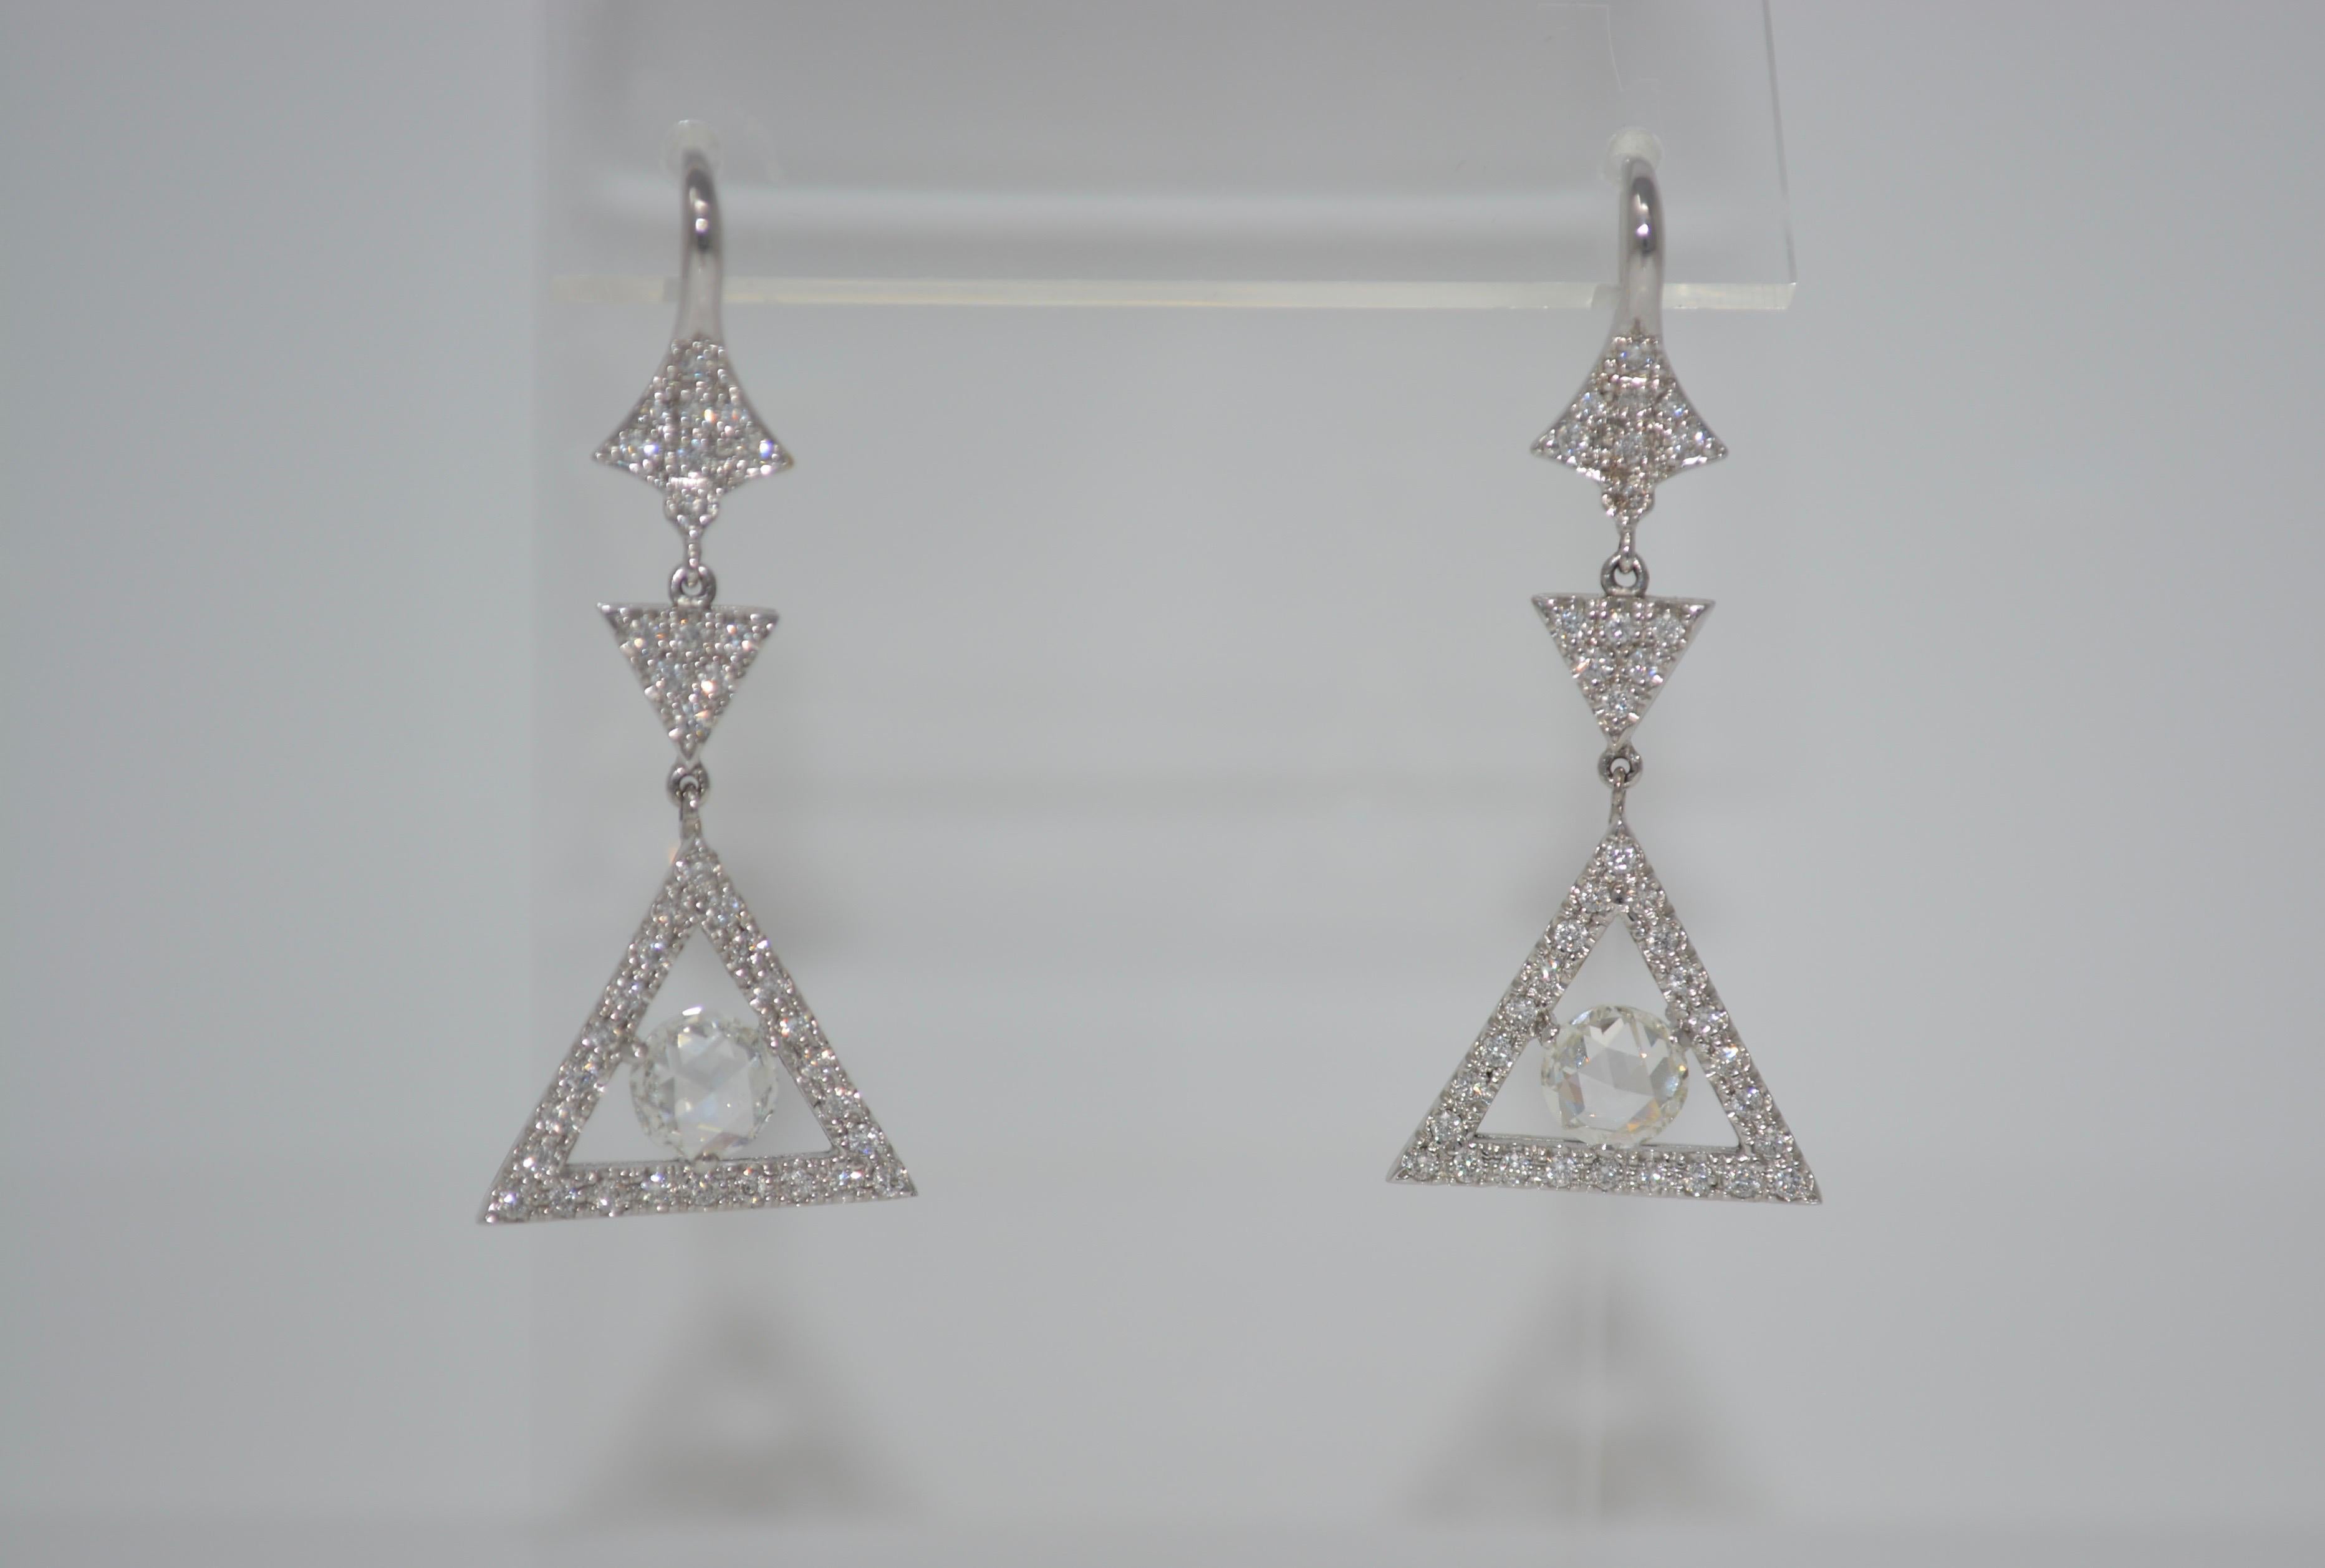 These Lovely and detailed earrings are classy and wearable. They are made in 18K white gold and features two rose cut diamonds 0.80 carat each total of 1.60 carat  with F G color and VS clarity  set in the center of diamond studded triangles  which